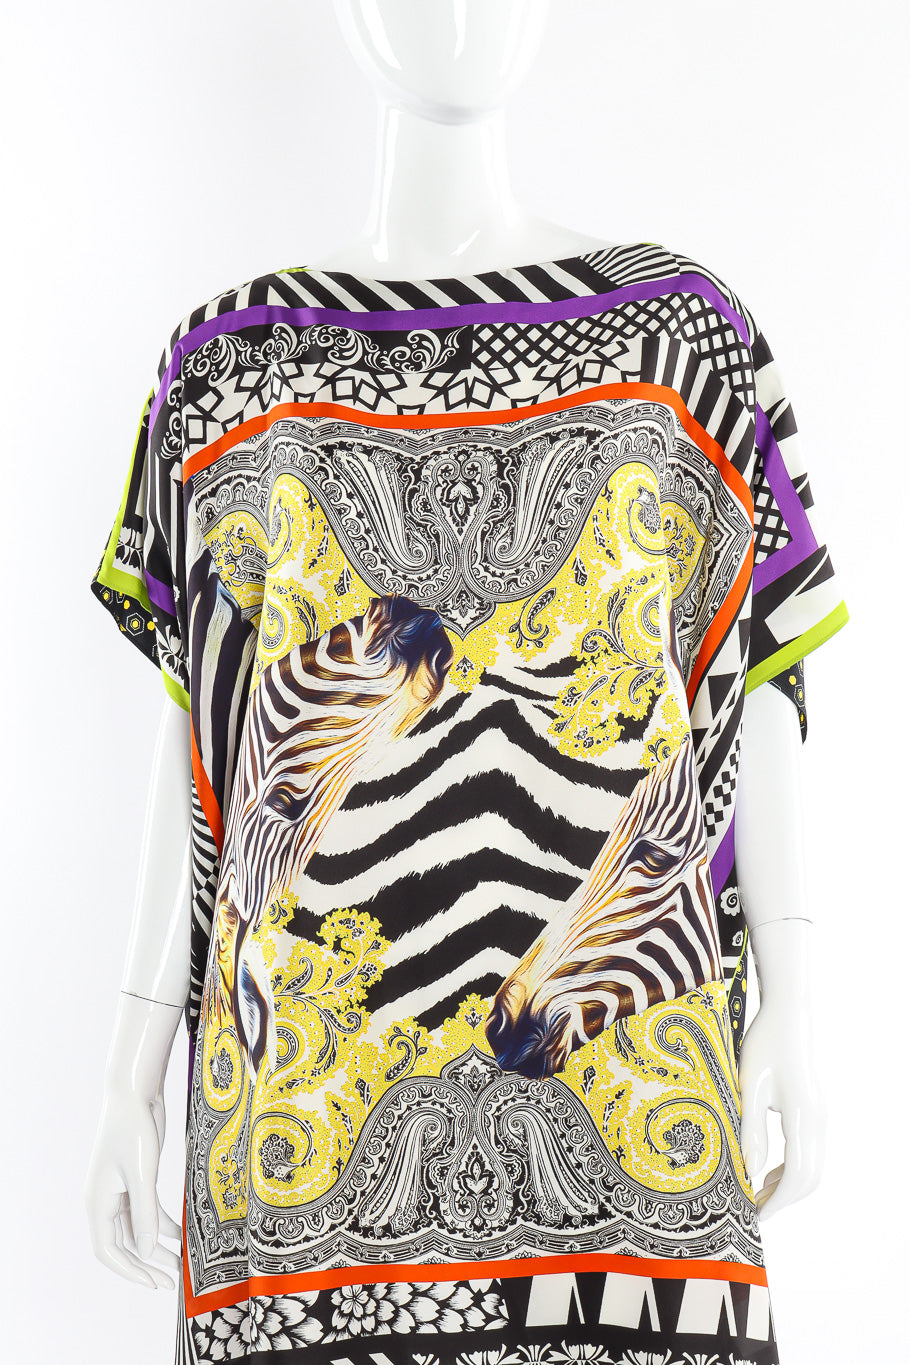 Poncho scarf top by Etro mannequin close cropped @recessla